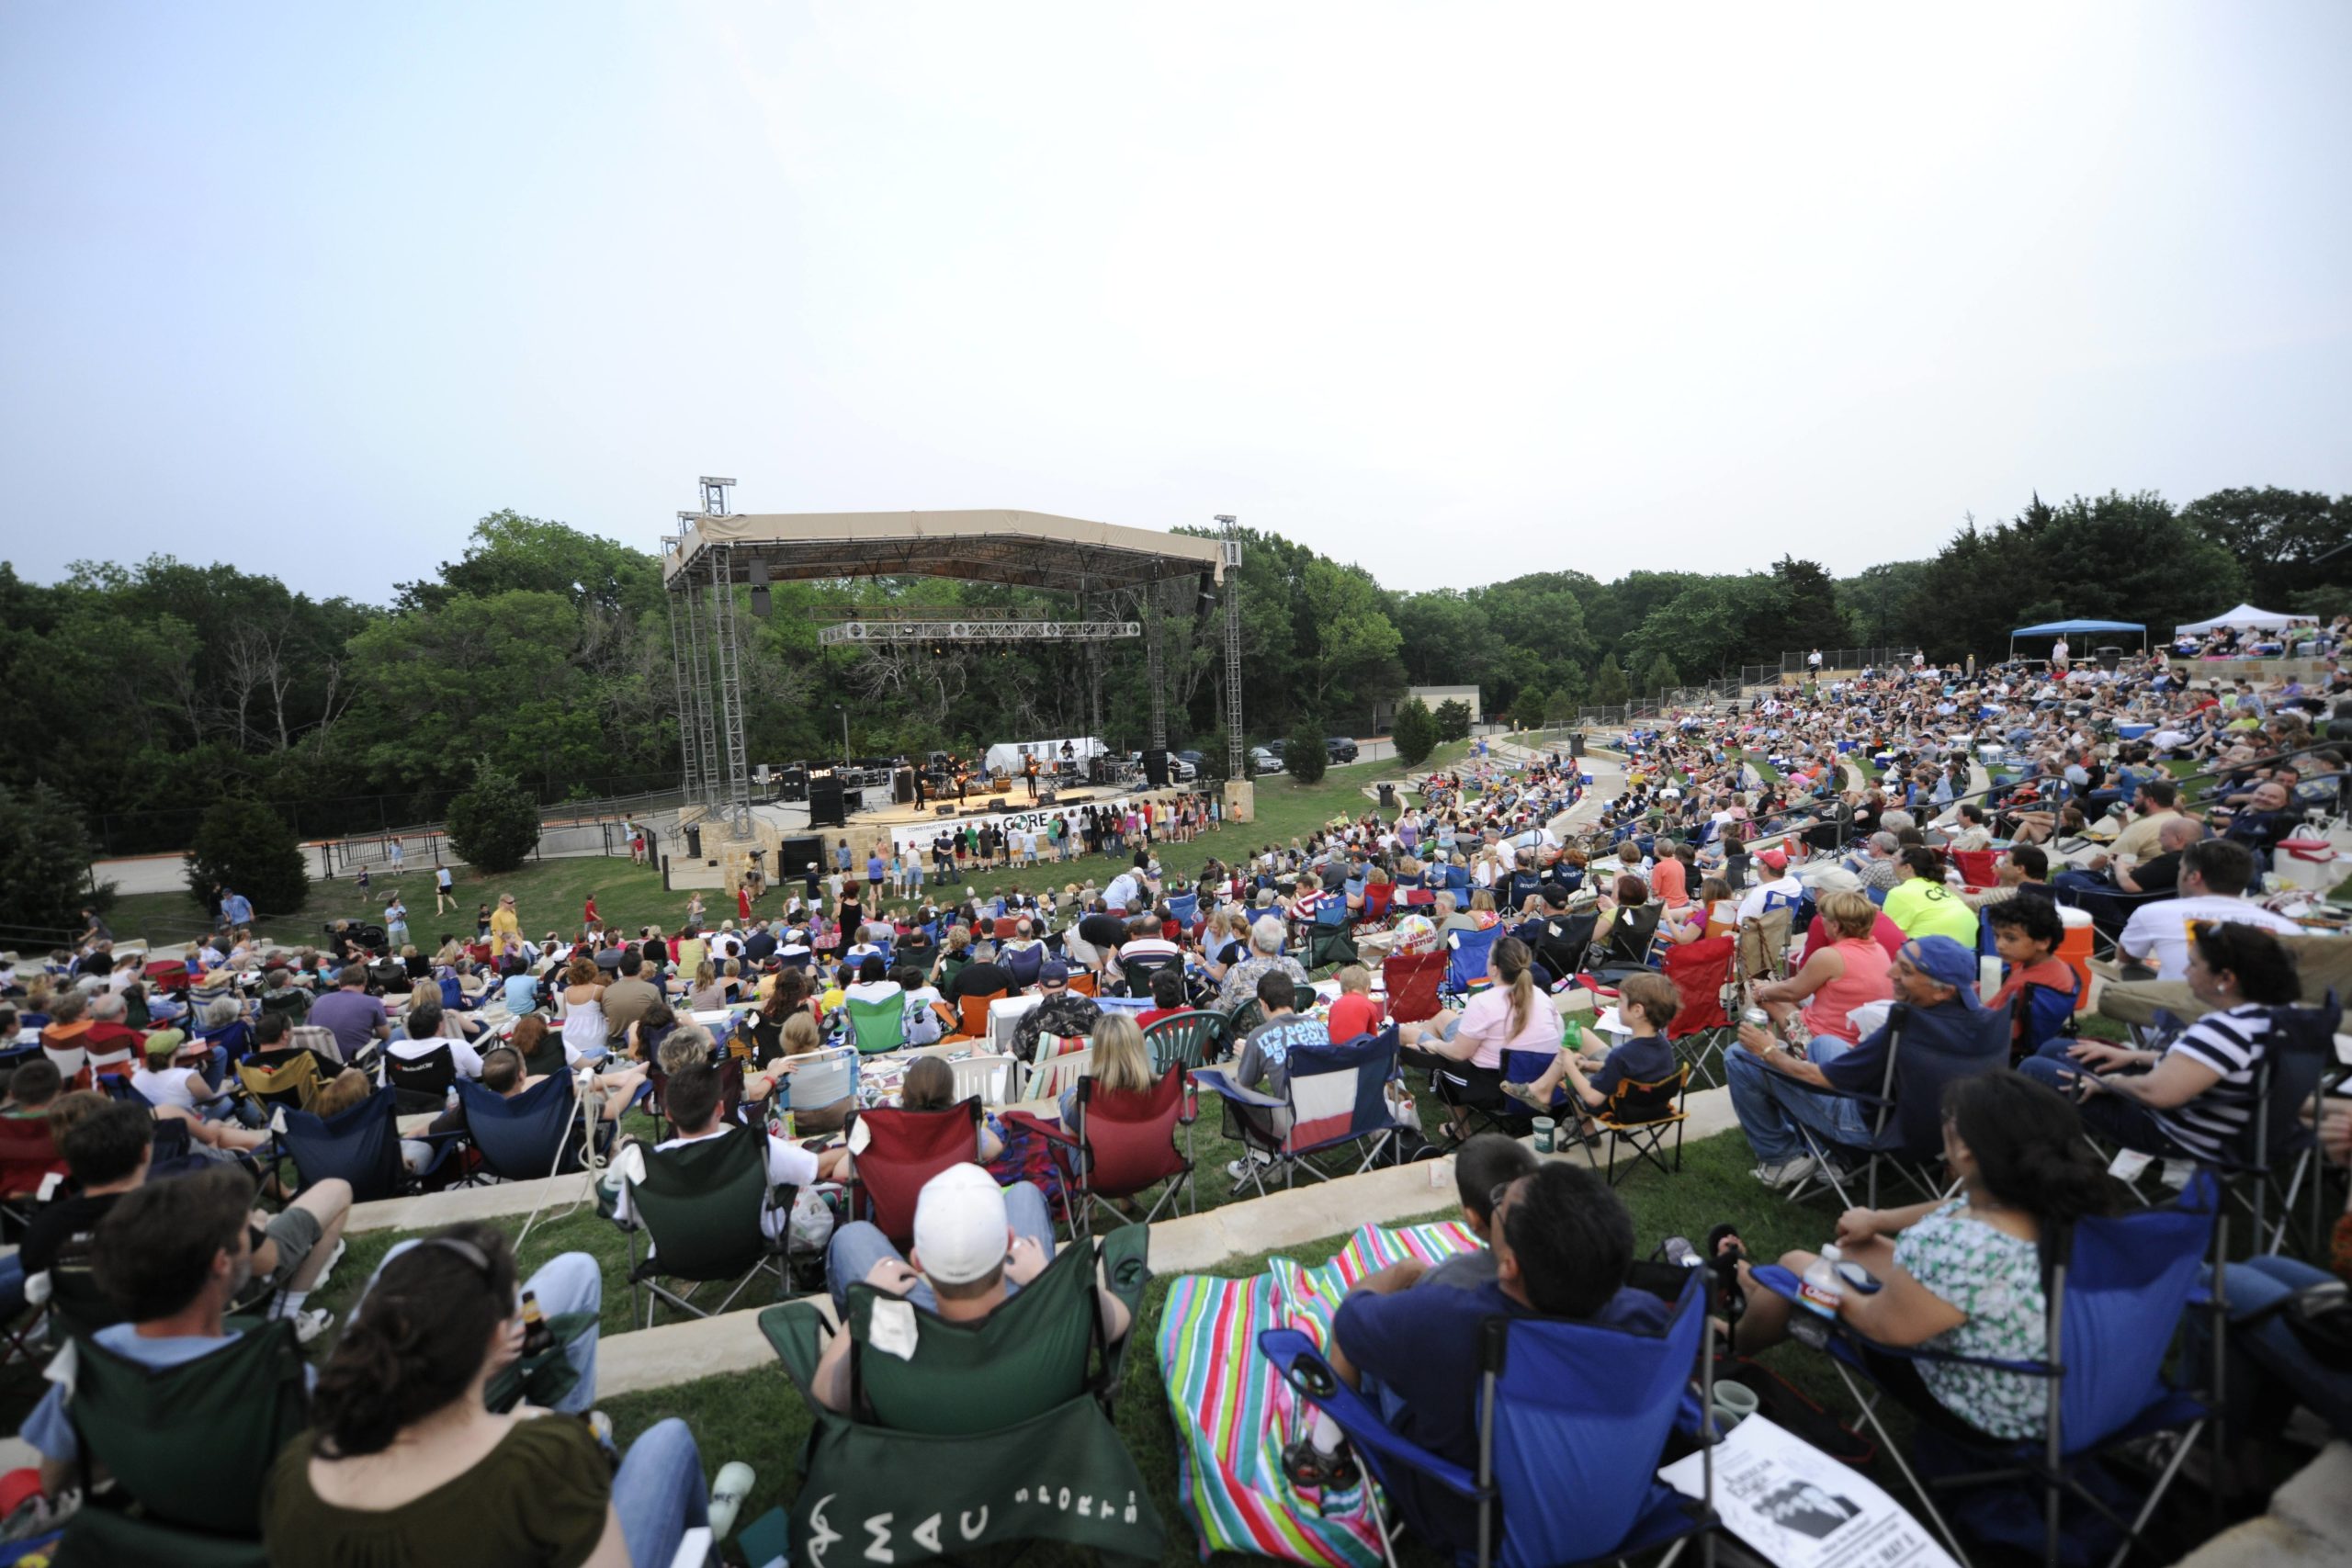 Spring concerts at the Amphitheater